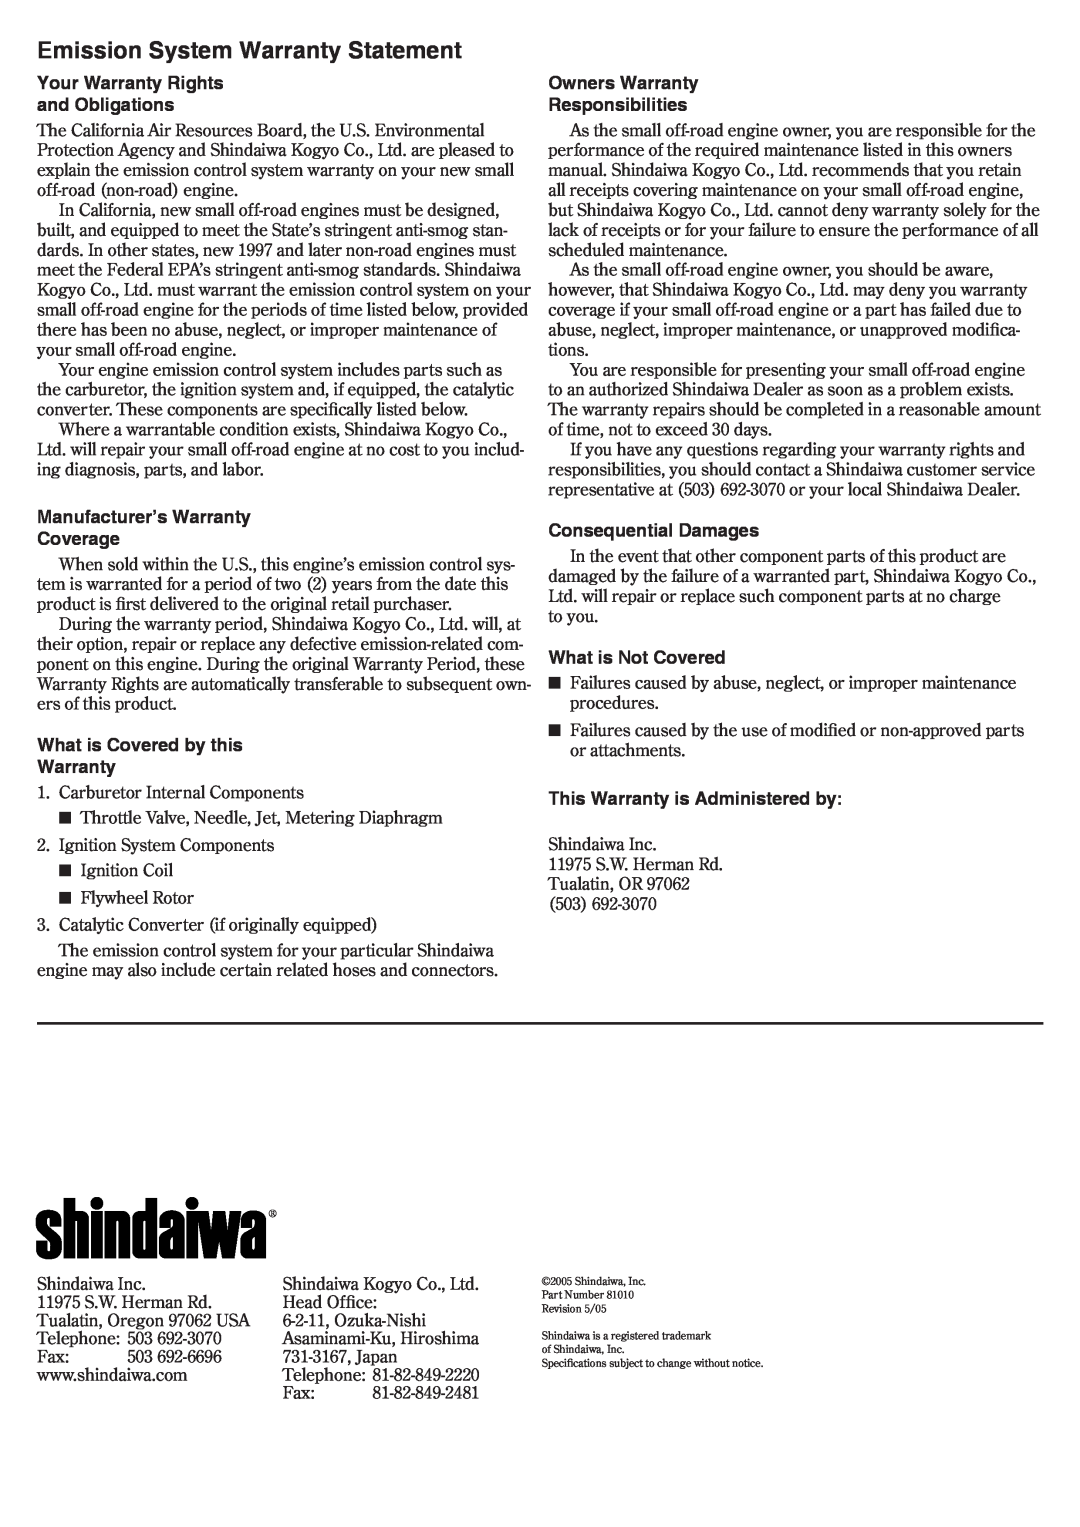 Shindaiwa 81010 Emission System Warranty Statement, Your Warranty Rights and Obligations, Owners Warranty Responsibilities 